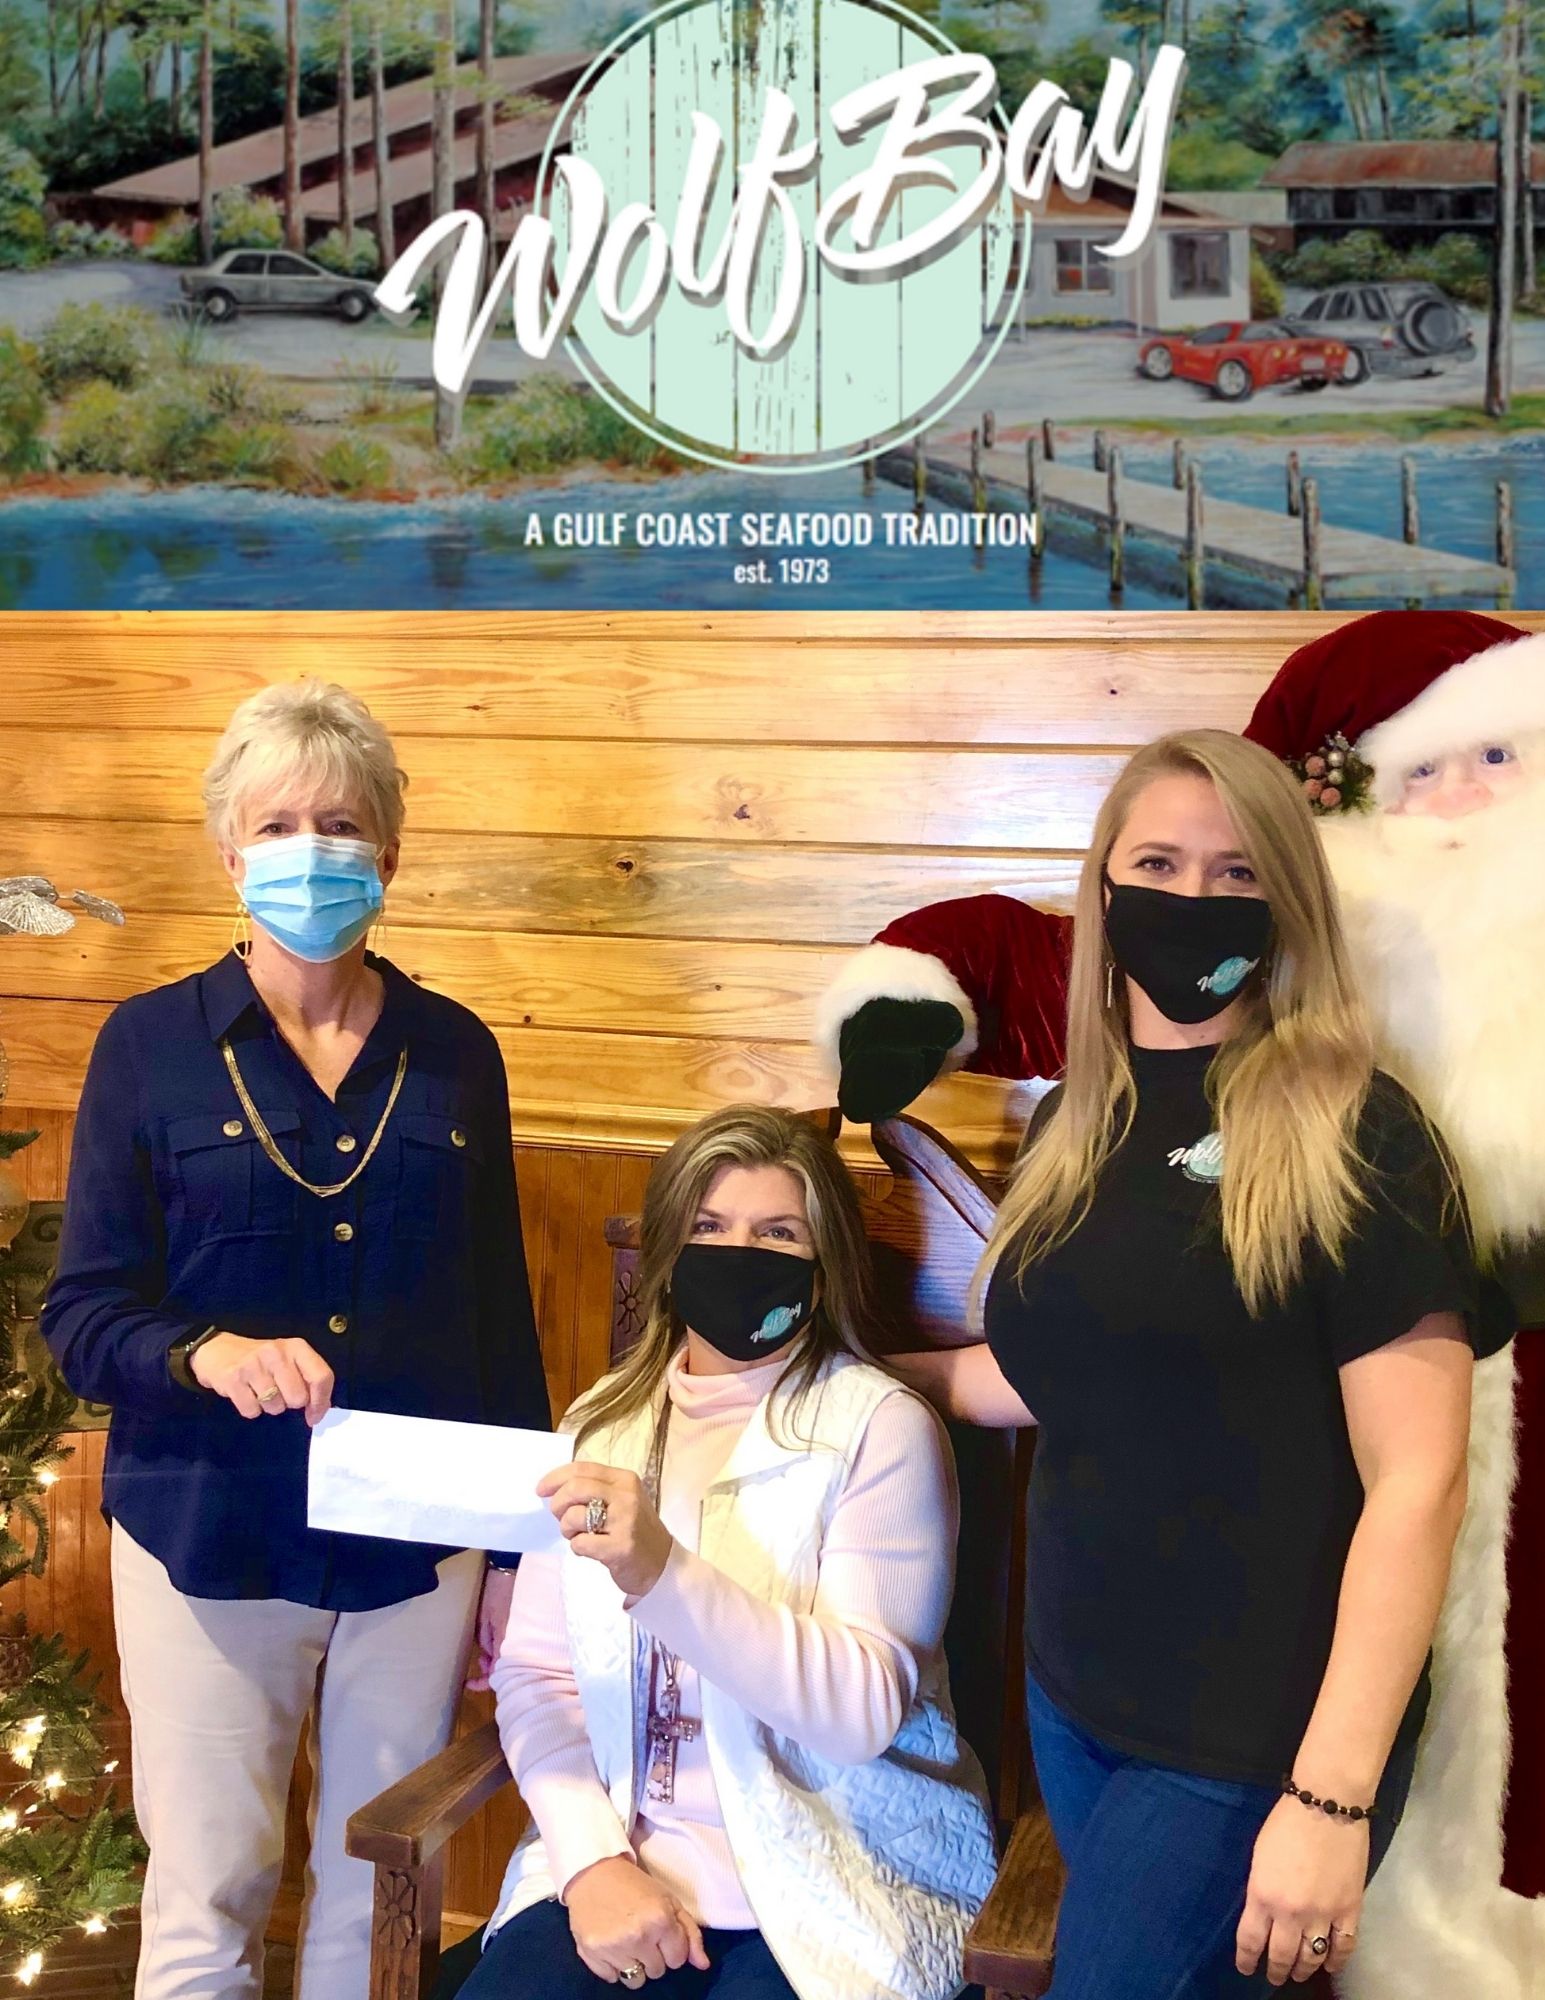 Pictured: Char Haber, Wolf Bay Restaurant Owner and SBCS Alumni (center), and Whitney Haber, Wolf Bay Manager (right), presenting a check to Dr. Kathy McCool, SBCS Principal (left).